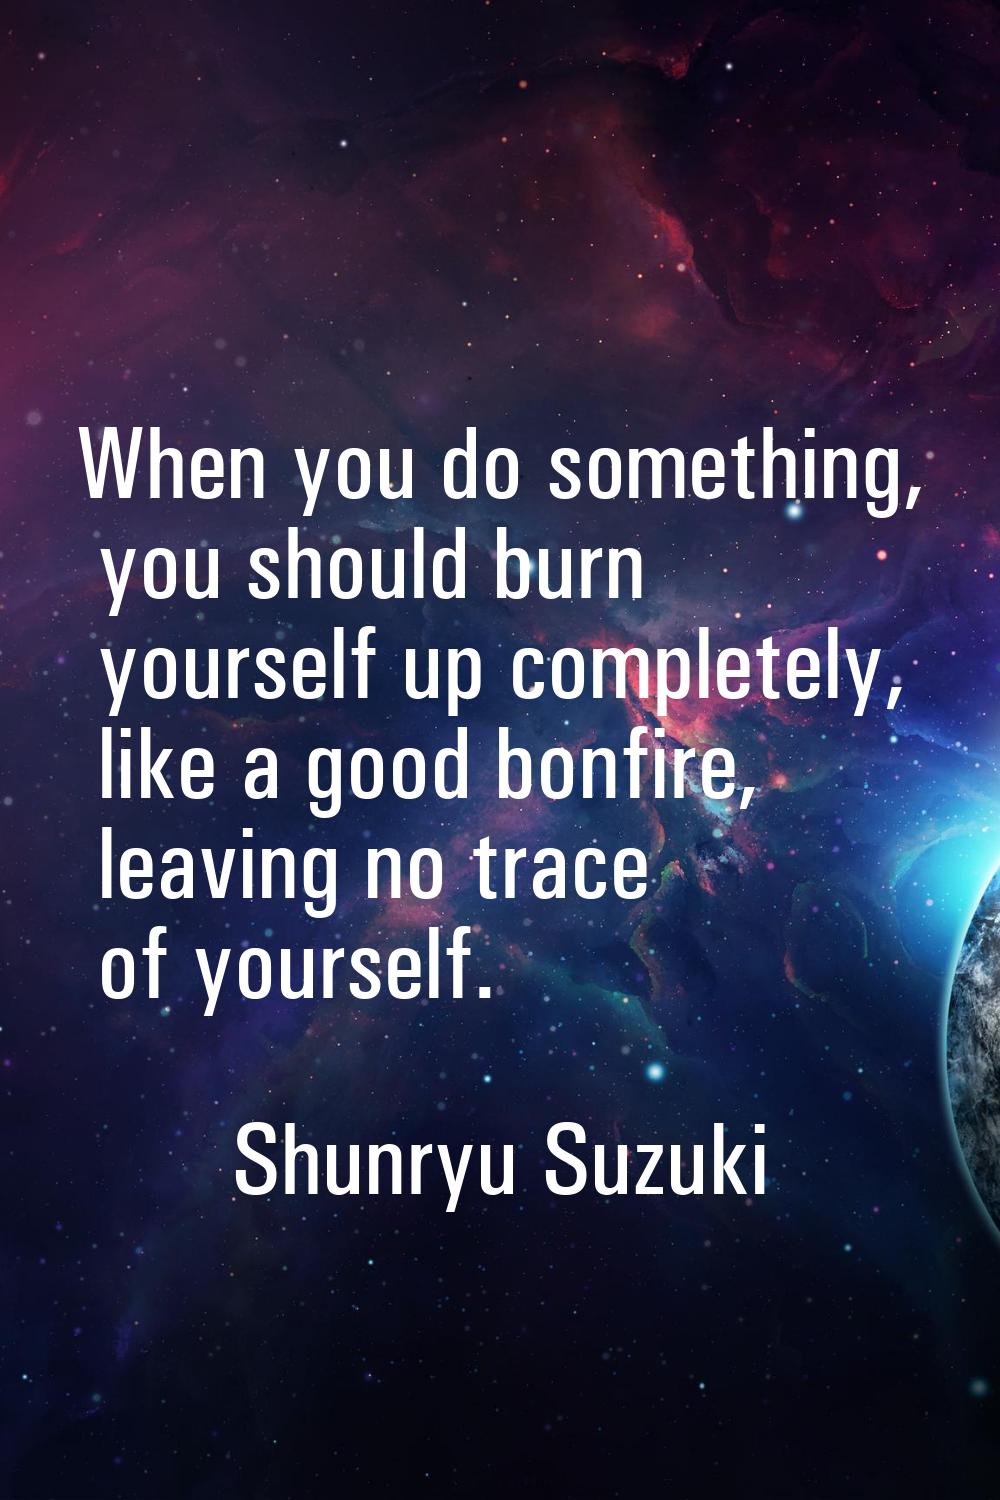 When you do something, you should burn yourself up completely, like a good bonfire, leaving no trac